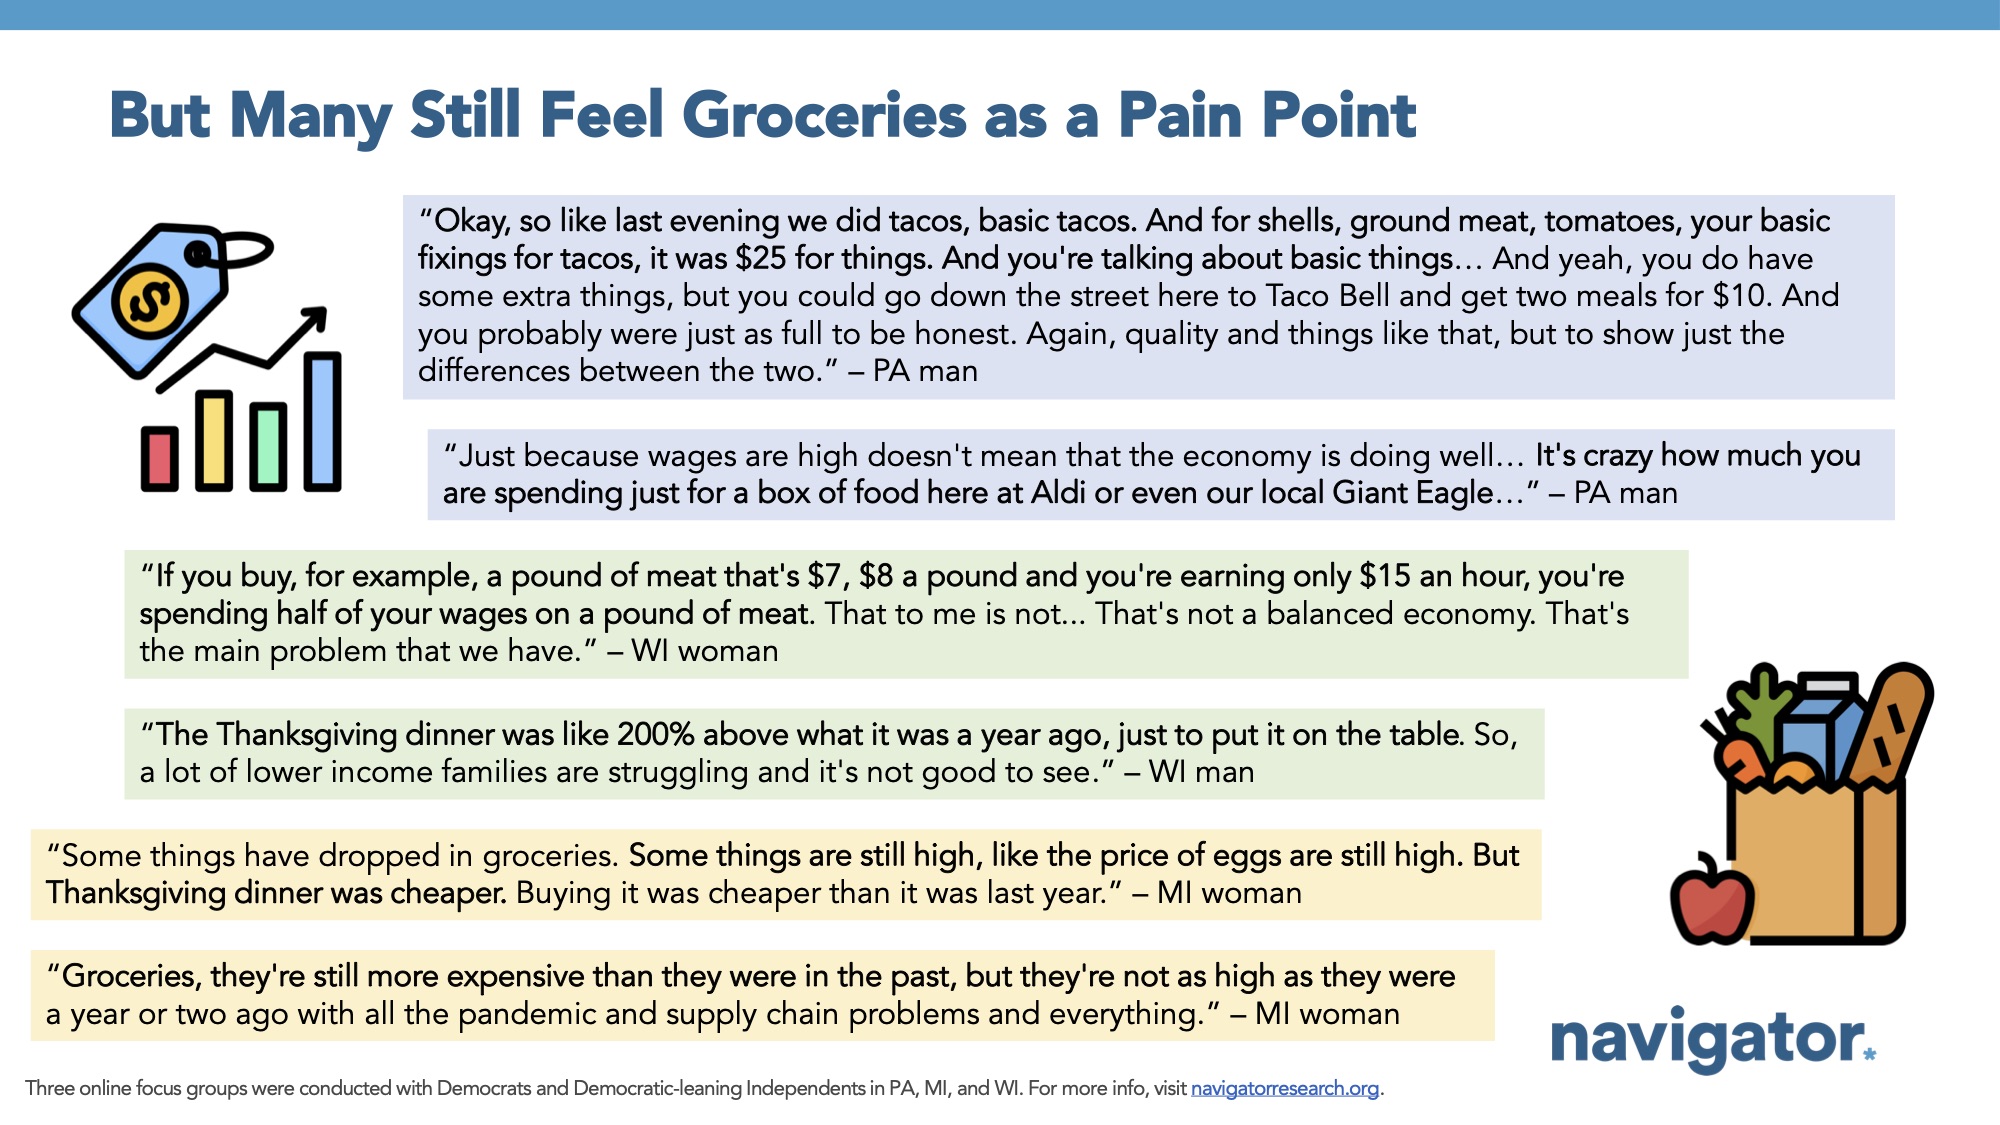 Focus group report slide titled: But Many Still Feel Groceries as a Pain Point